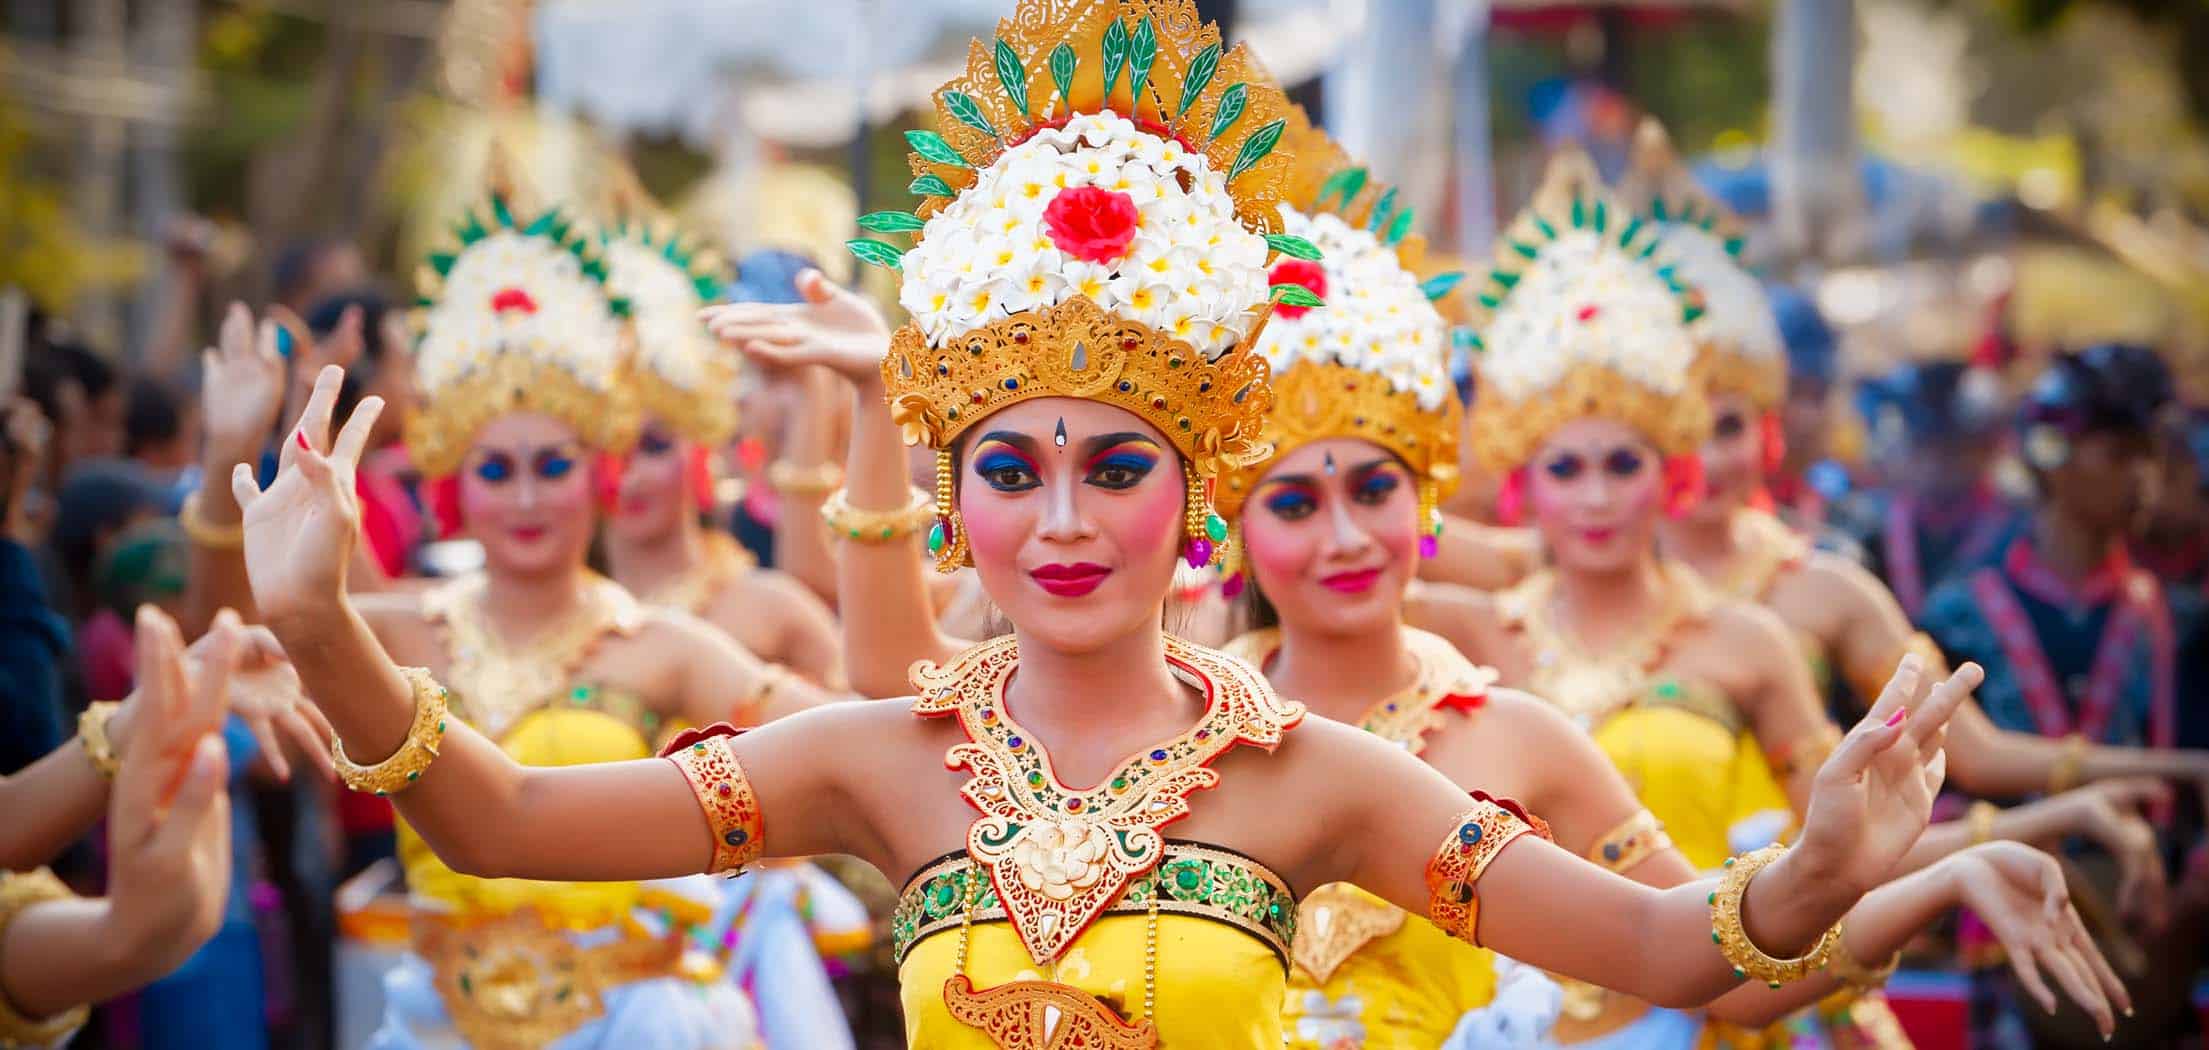 Balinese dancers in Ubud, dressed in traditional Balinese clothes and strong make-up